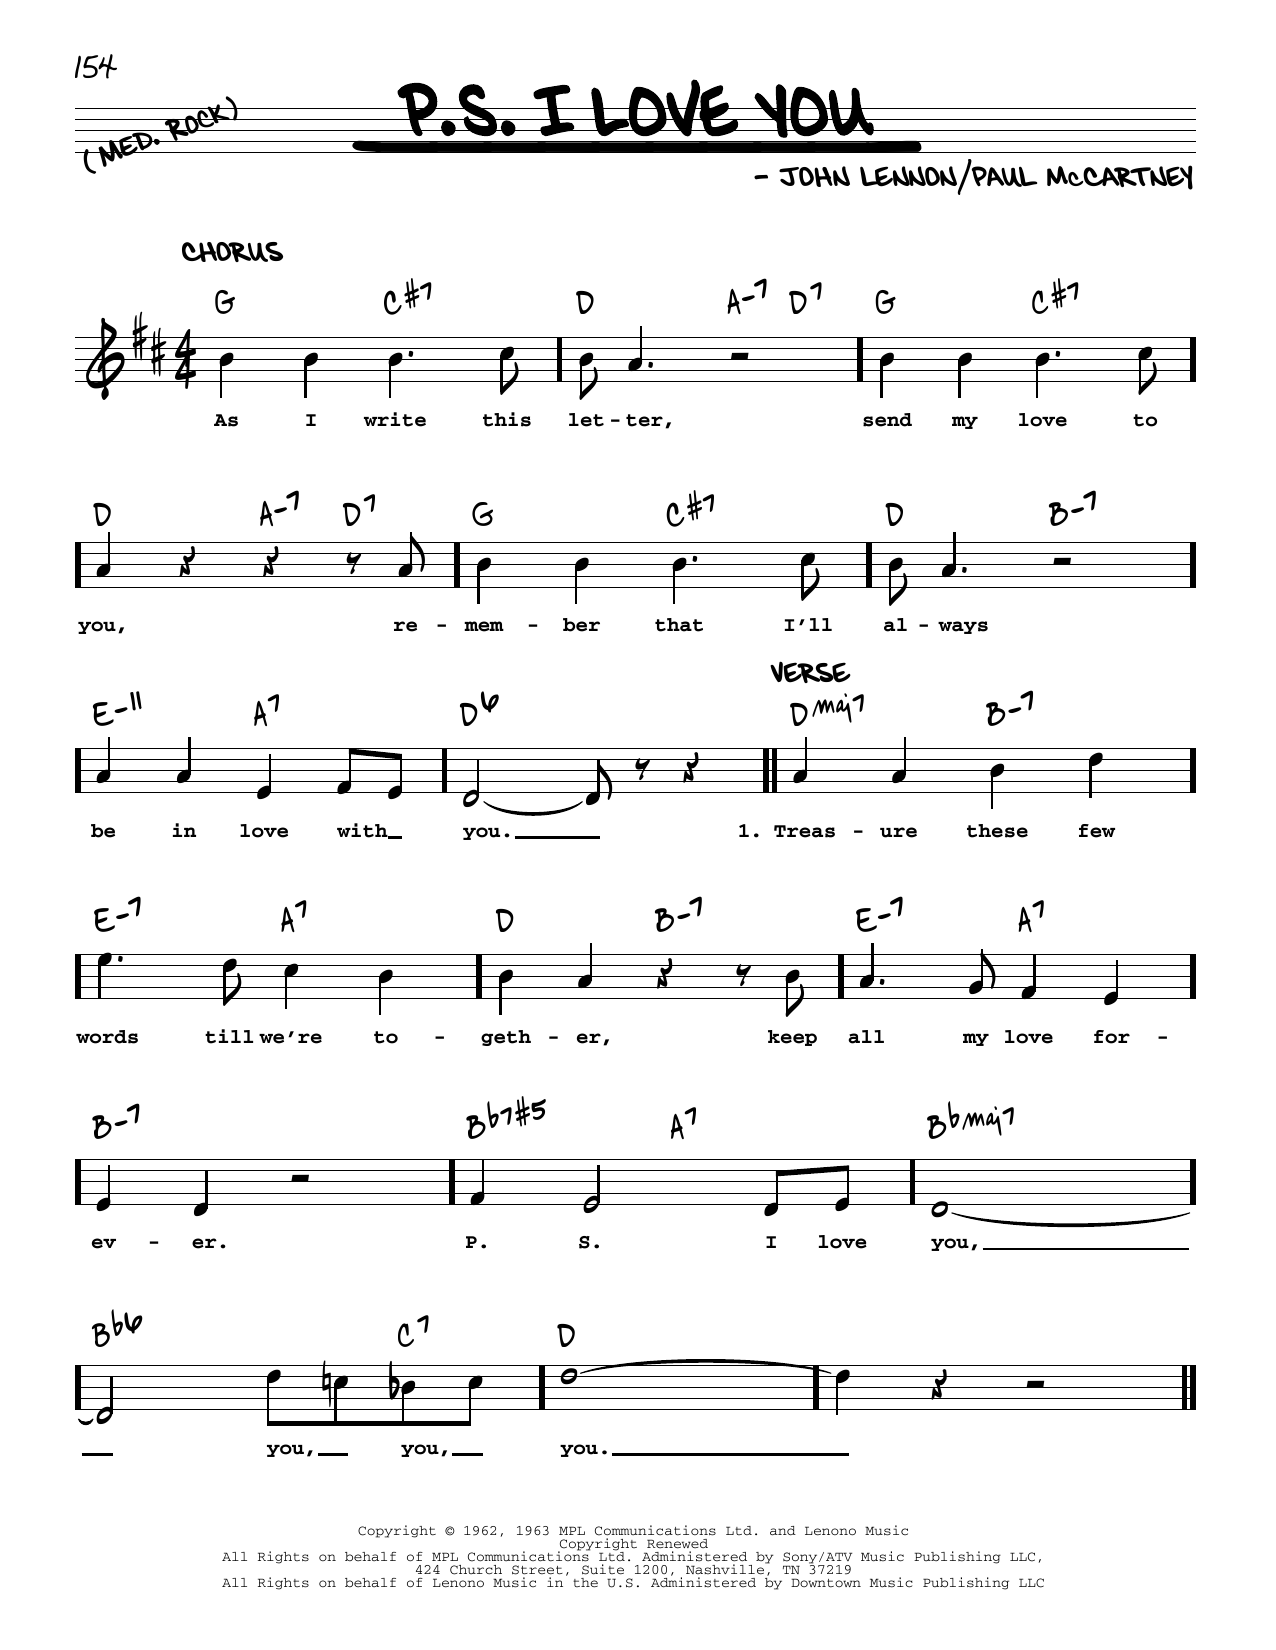 Download The Beatles P.S. I Love You [Jazz version] Sheet Music